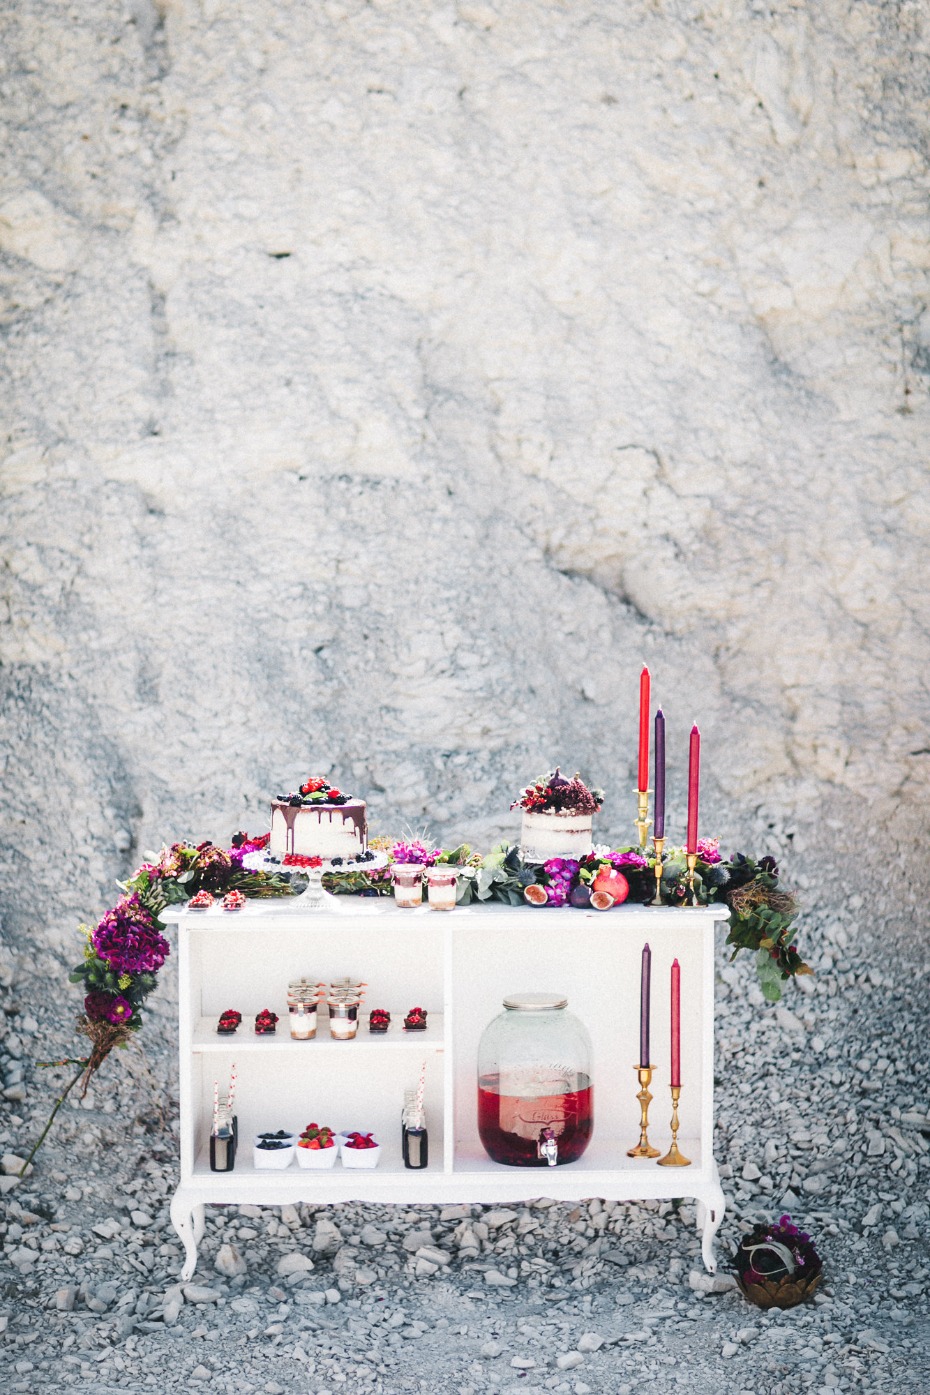 Berry toned cake table